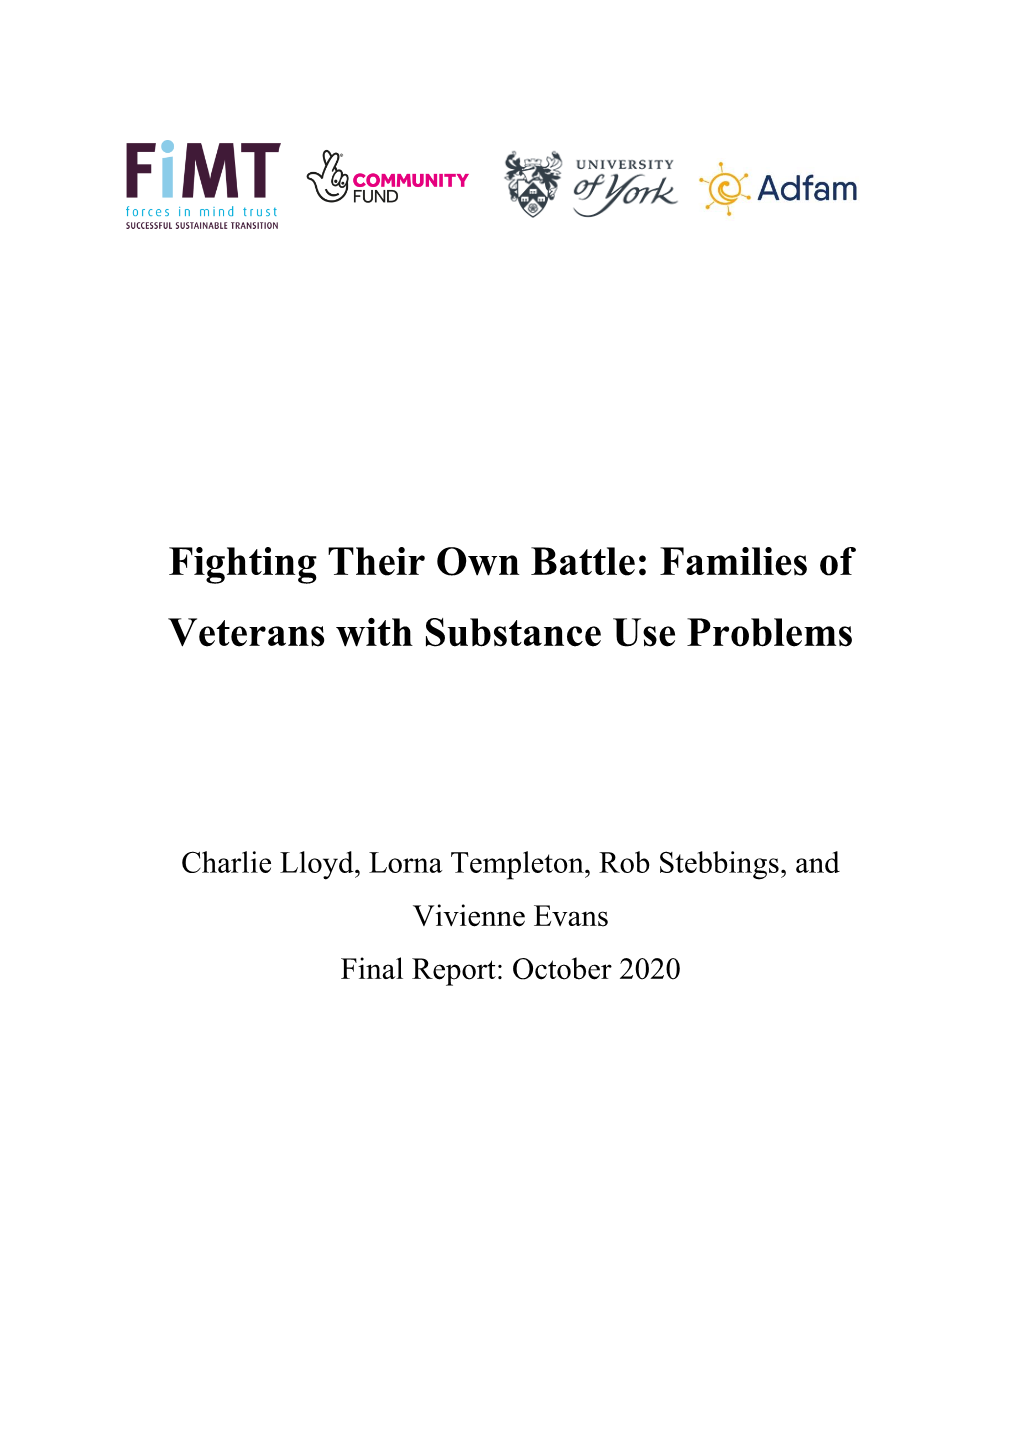 Families of Veterans with Substance Use Problems